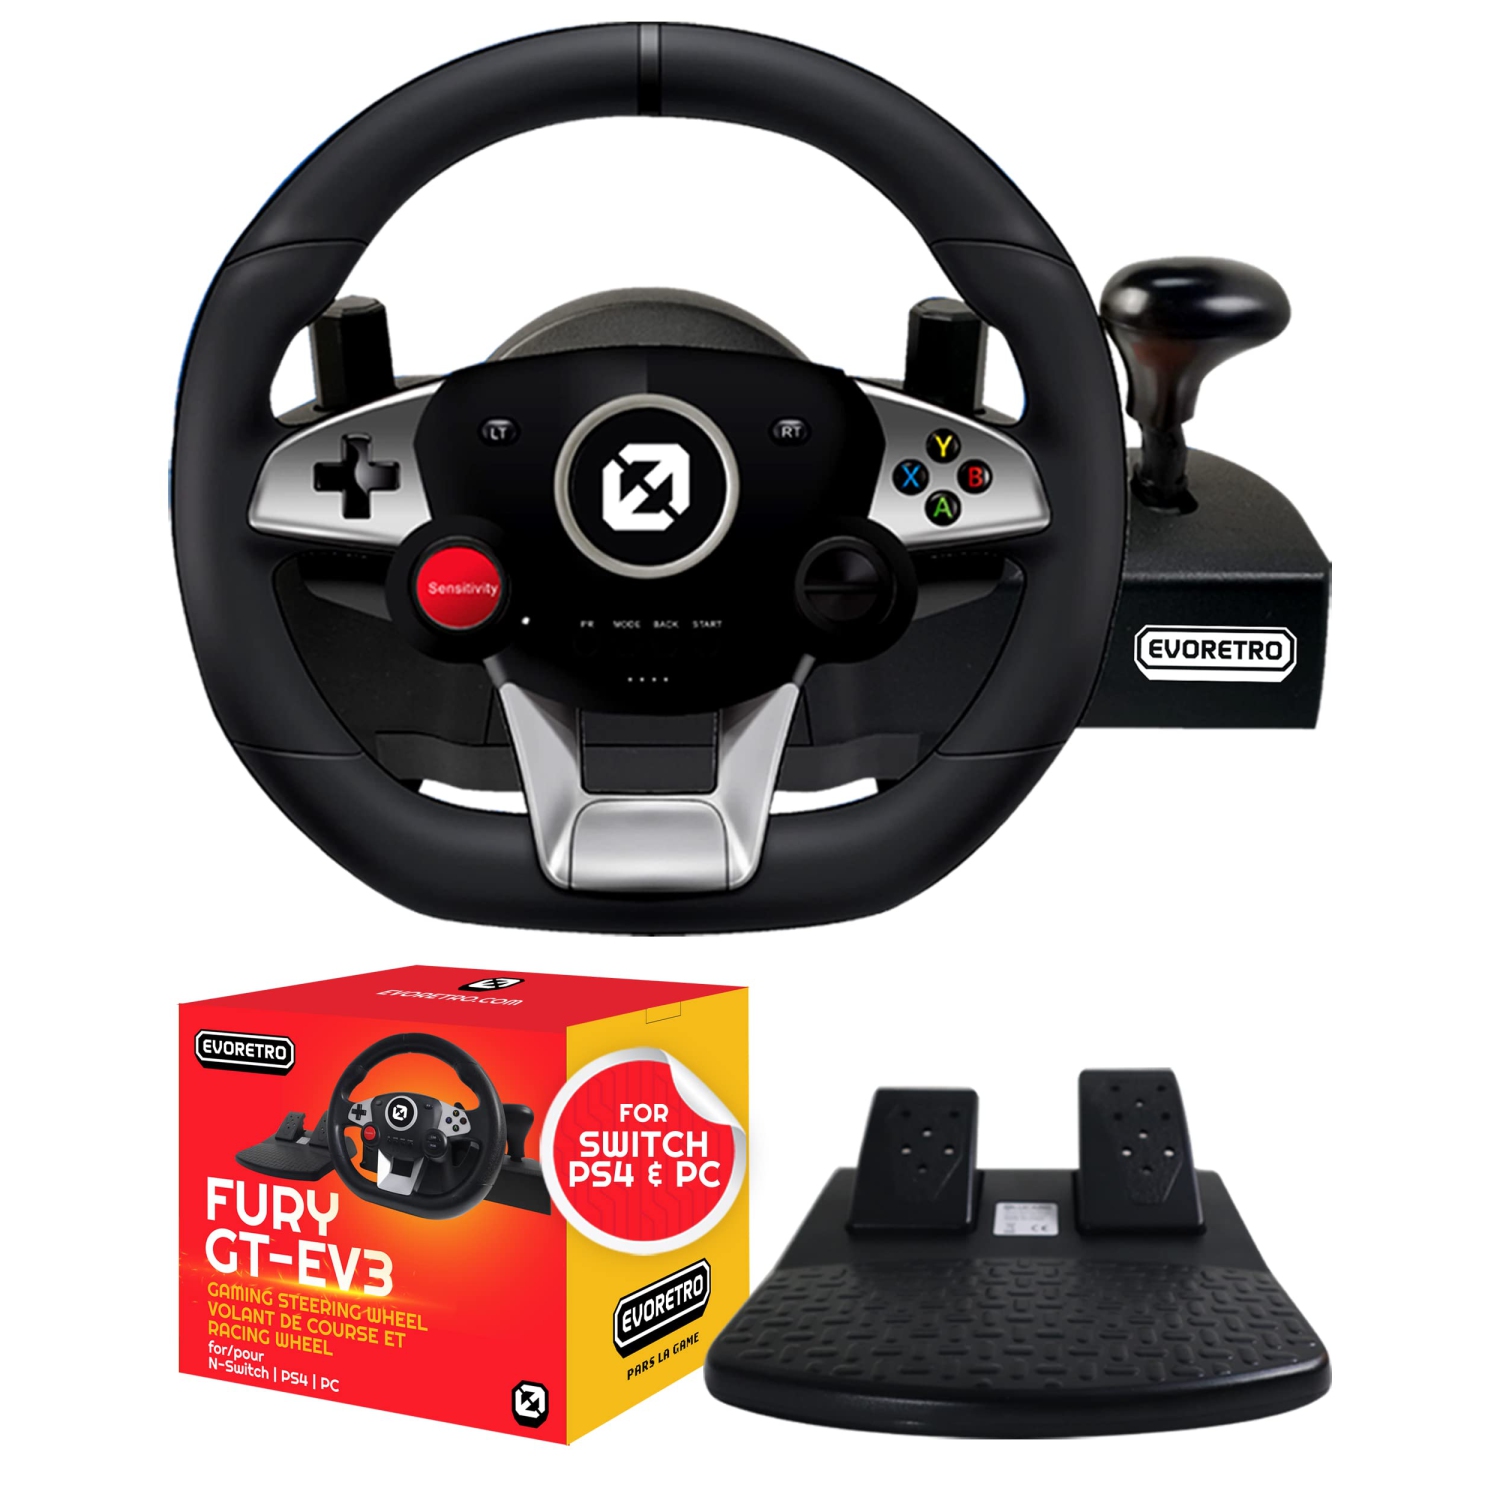 Fury GT-EV3 Gaming Steering Wheel with Gear Lever, Pedals, Wires, Clamp, and a FREE EVORETRO Sack Bag